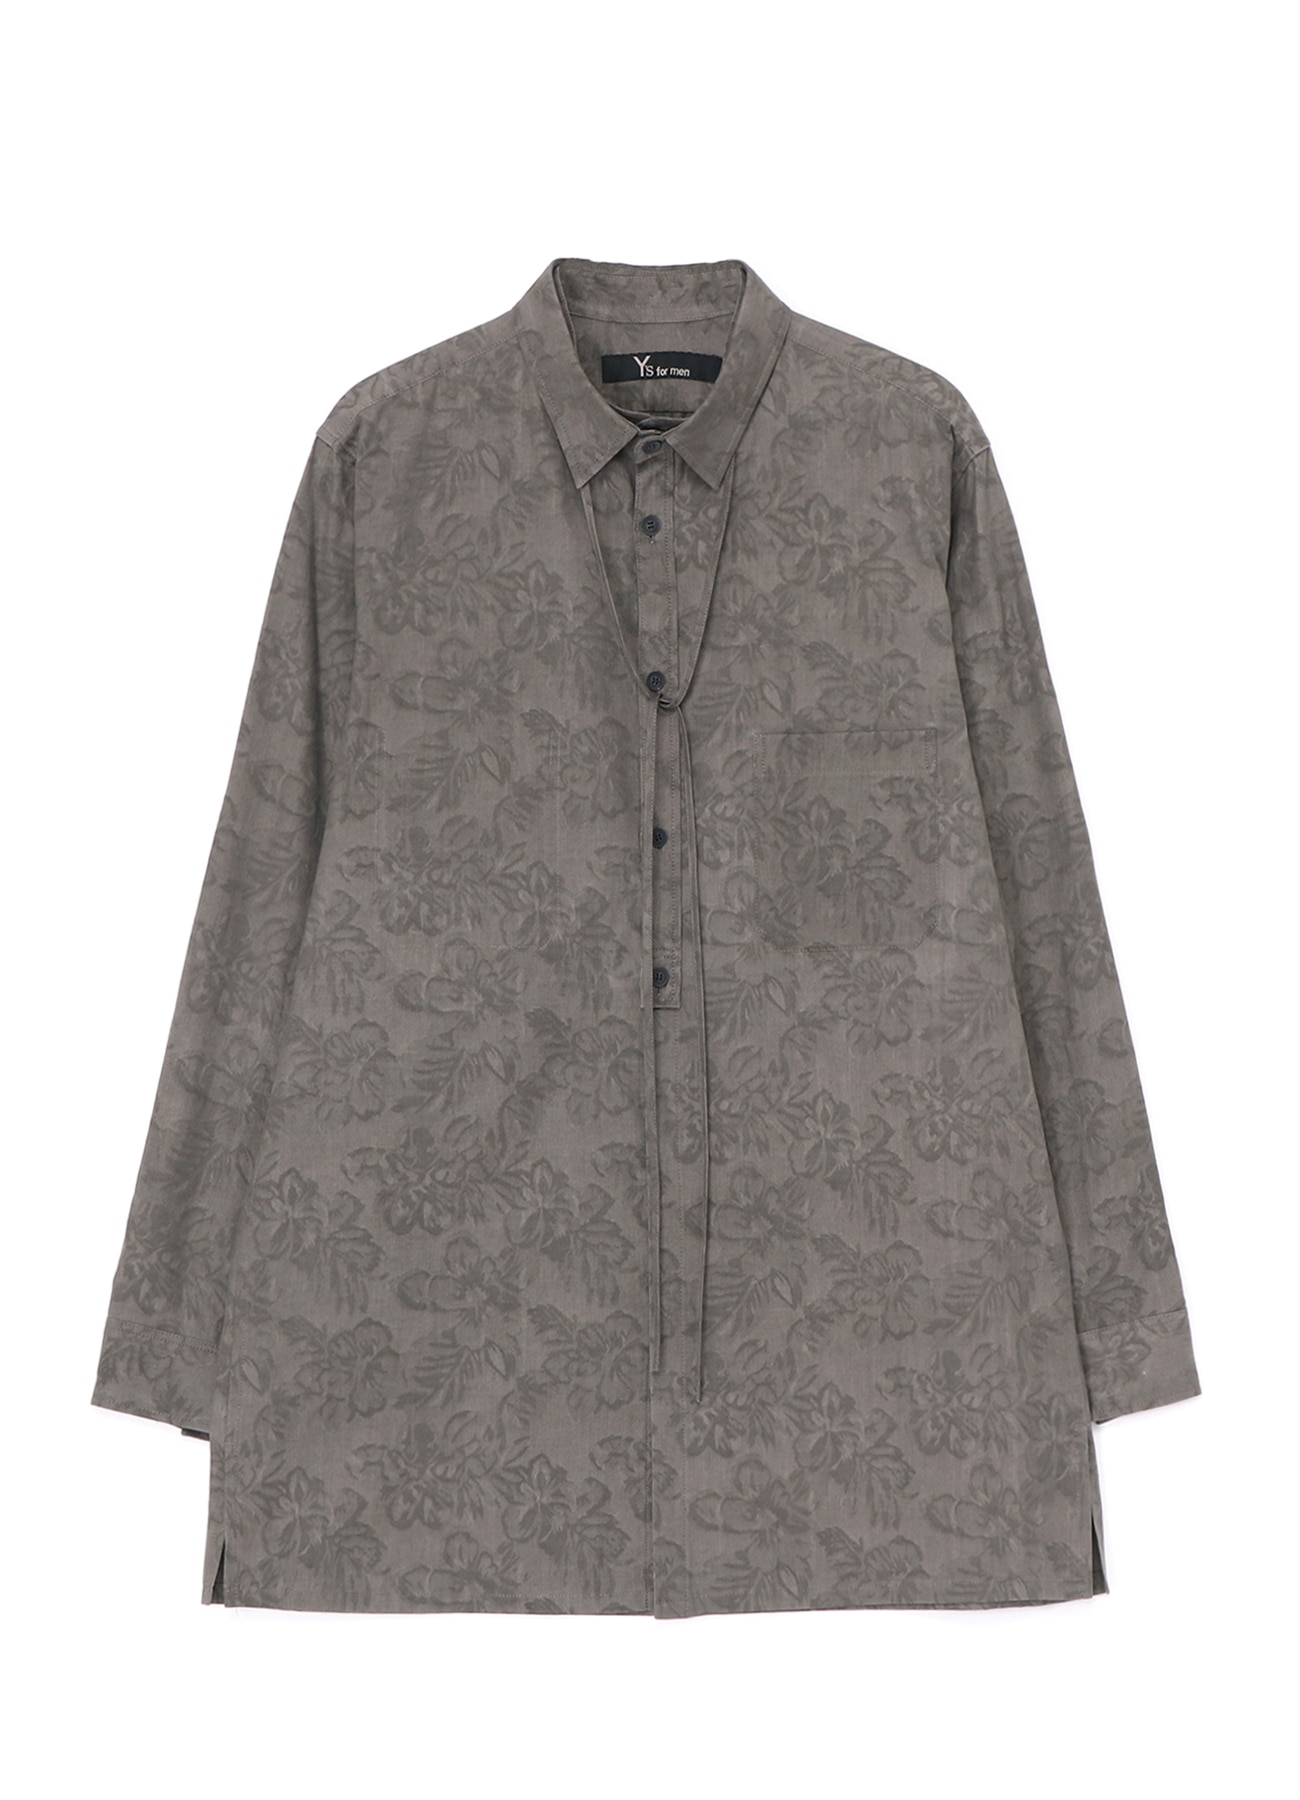 FLORAL JACQUARD SHIRT WITH COLLAR CORD DETAIL